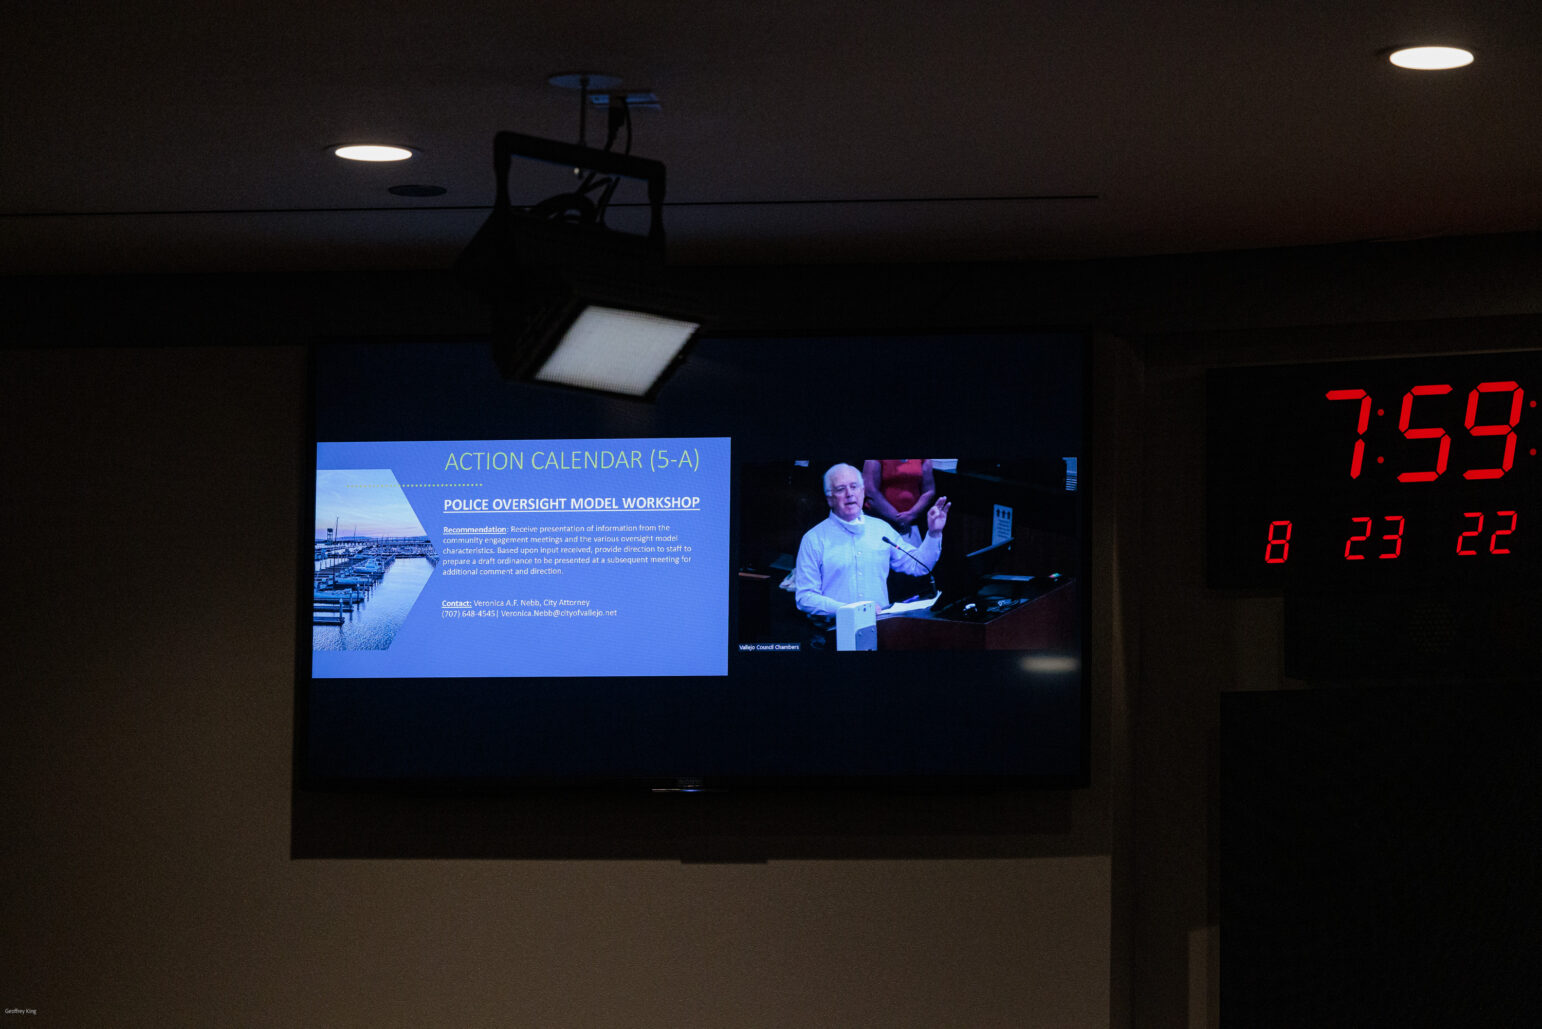 An image showing a darkened room with a large digital display screen, featuring a slide from a presentation titled 'Police Oversight Model Workshop'. On the screen, a man is pictured speaking at a podium. To the right, there's a digital clock displaying the time as 7:59 and the date as August 23, 2022, in red numerals, indicating the context of a formal meeting or conference setting.